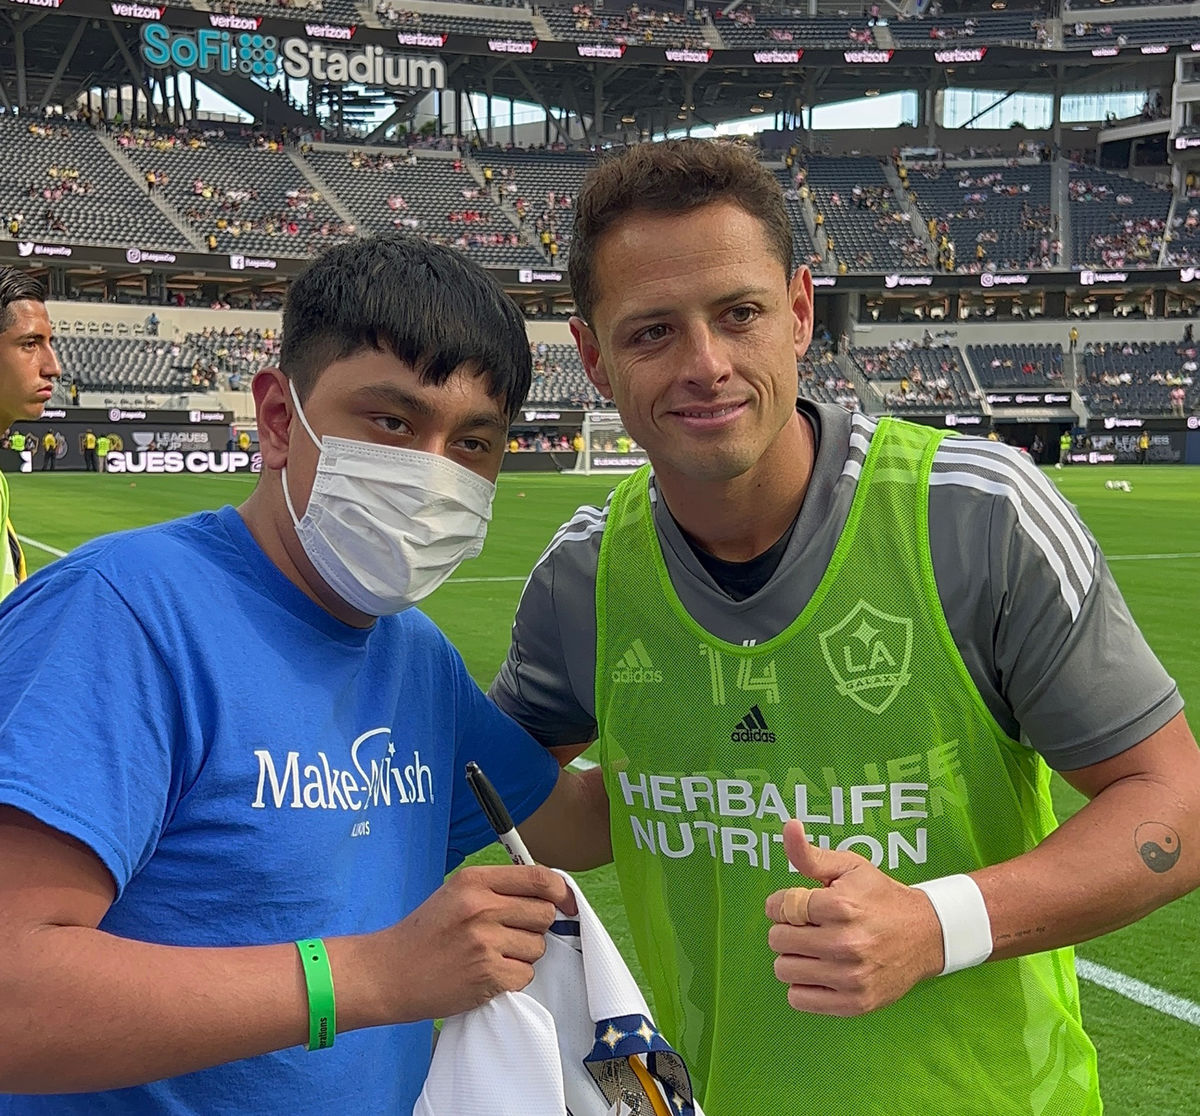 LA Galaxy's Javier "Chicarito" Hernandez poses on the pitch with Richey, a 17-year old Make A Wish recipient